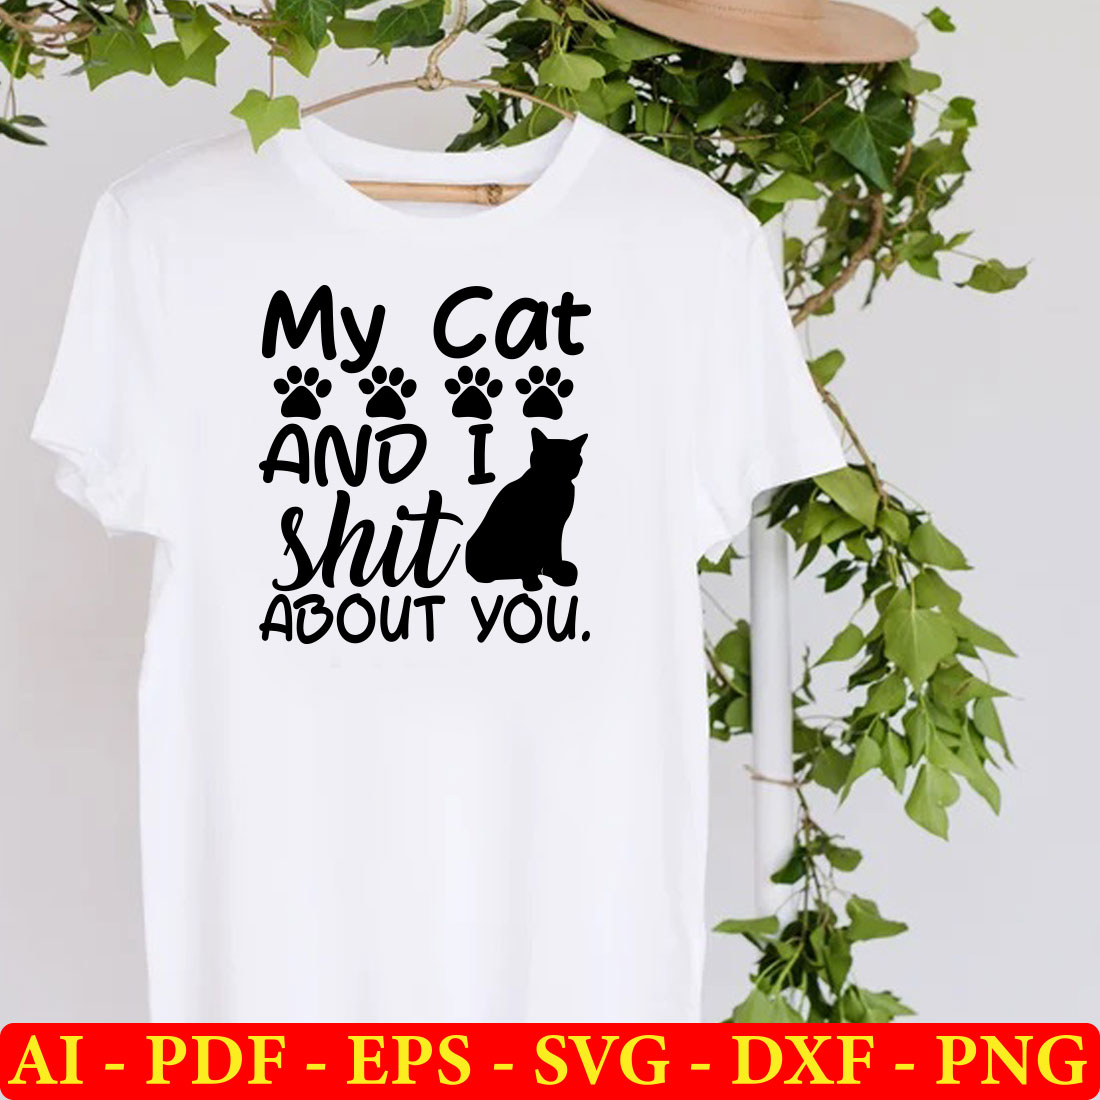 T - shirt with a cat and i shit about you on it.